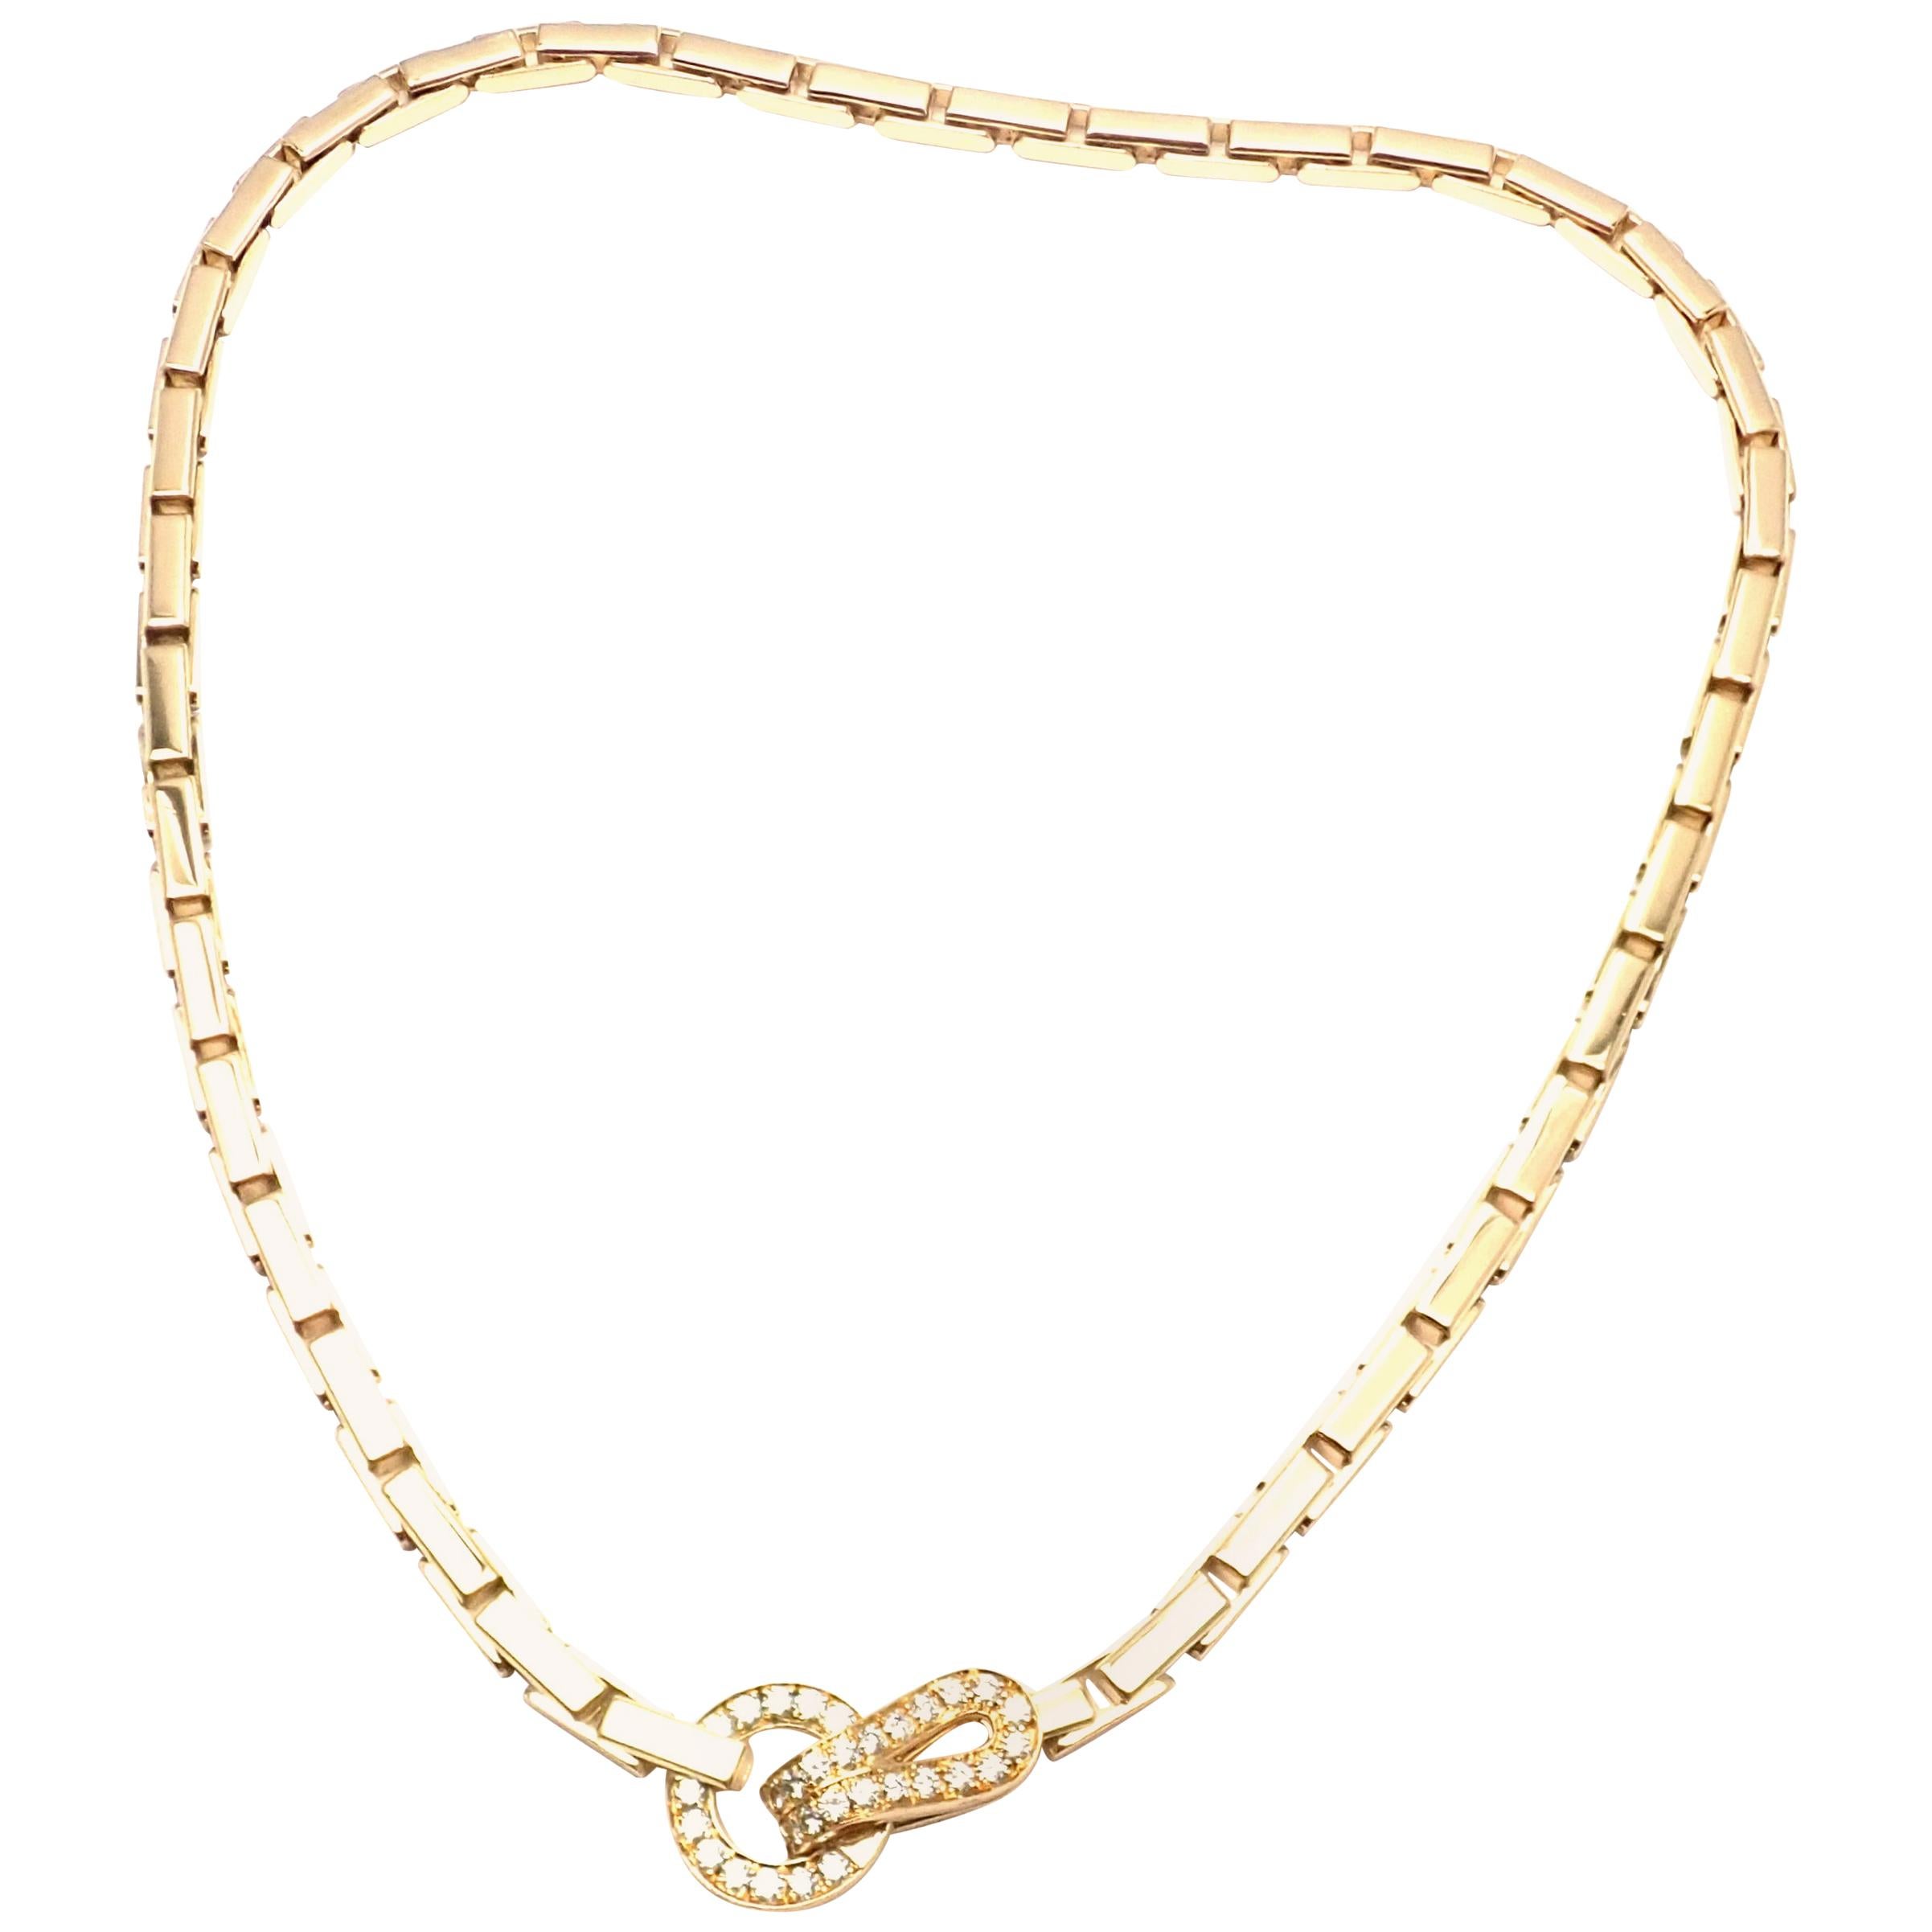 Cartier Agrafe Diamond Yellow Gold Necklace